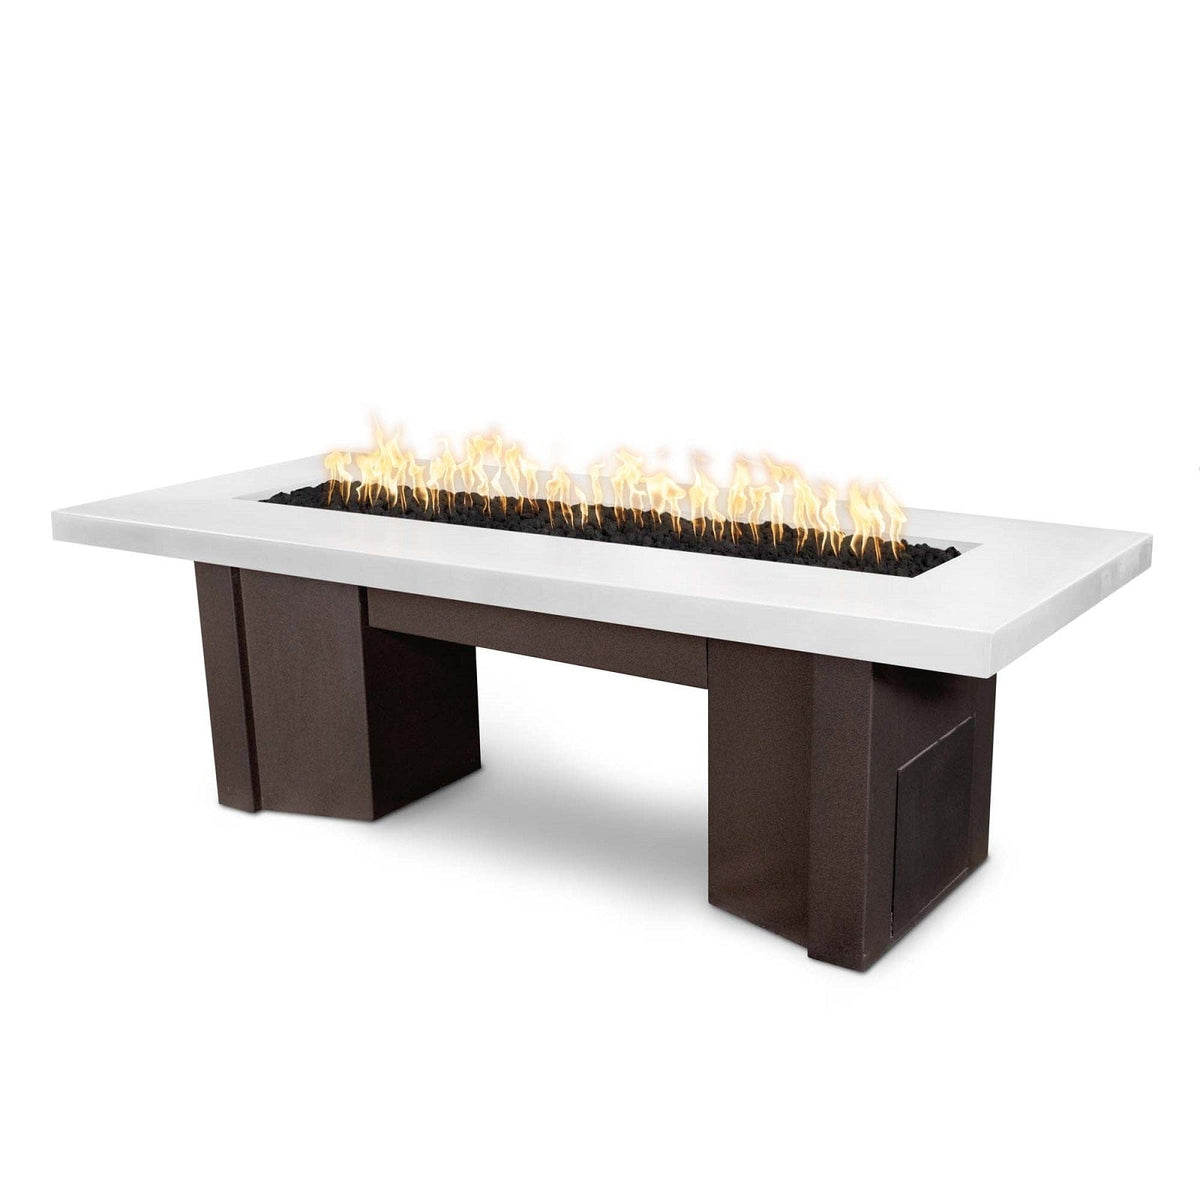 The Outdoor Plus Fire Features Limestone (-LIM) / Java Powder Coated Steel (-JAV) The Outdoor Plus 78&quot; Alameda Fire Table Smooth Concrete in Liquid Propane - Flame Sense System with Push Button Spark Igniter / OPT-ALMGFRC78FSEN-LP